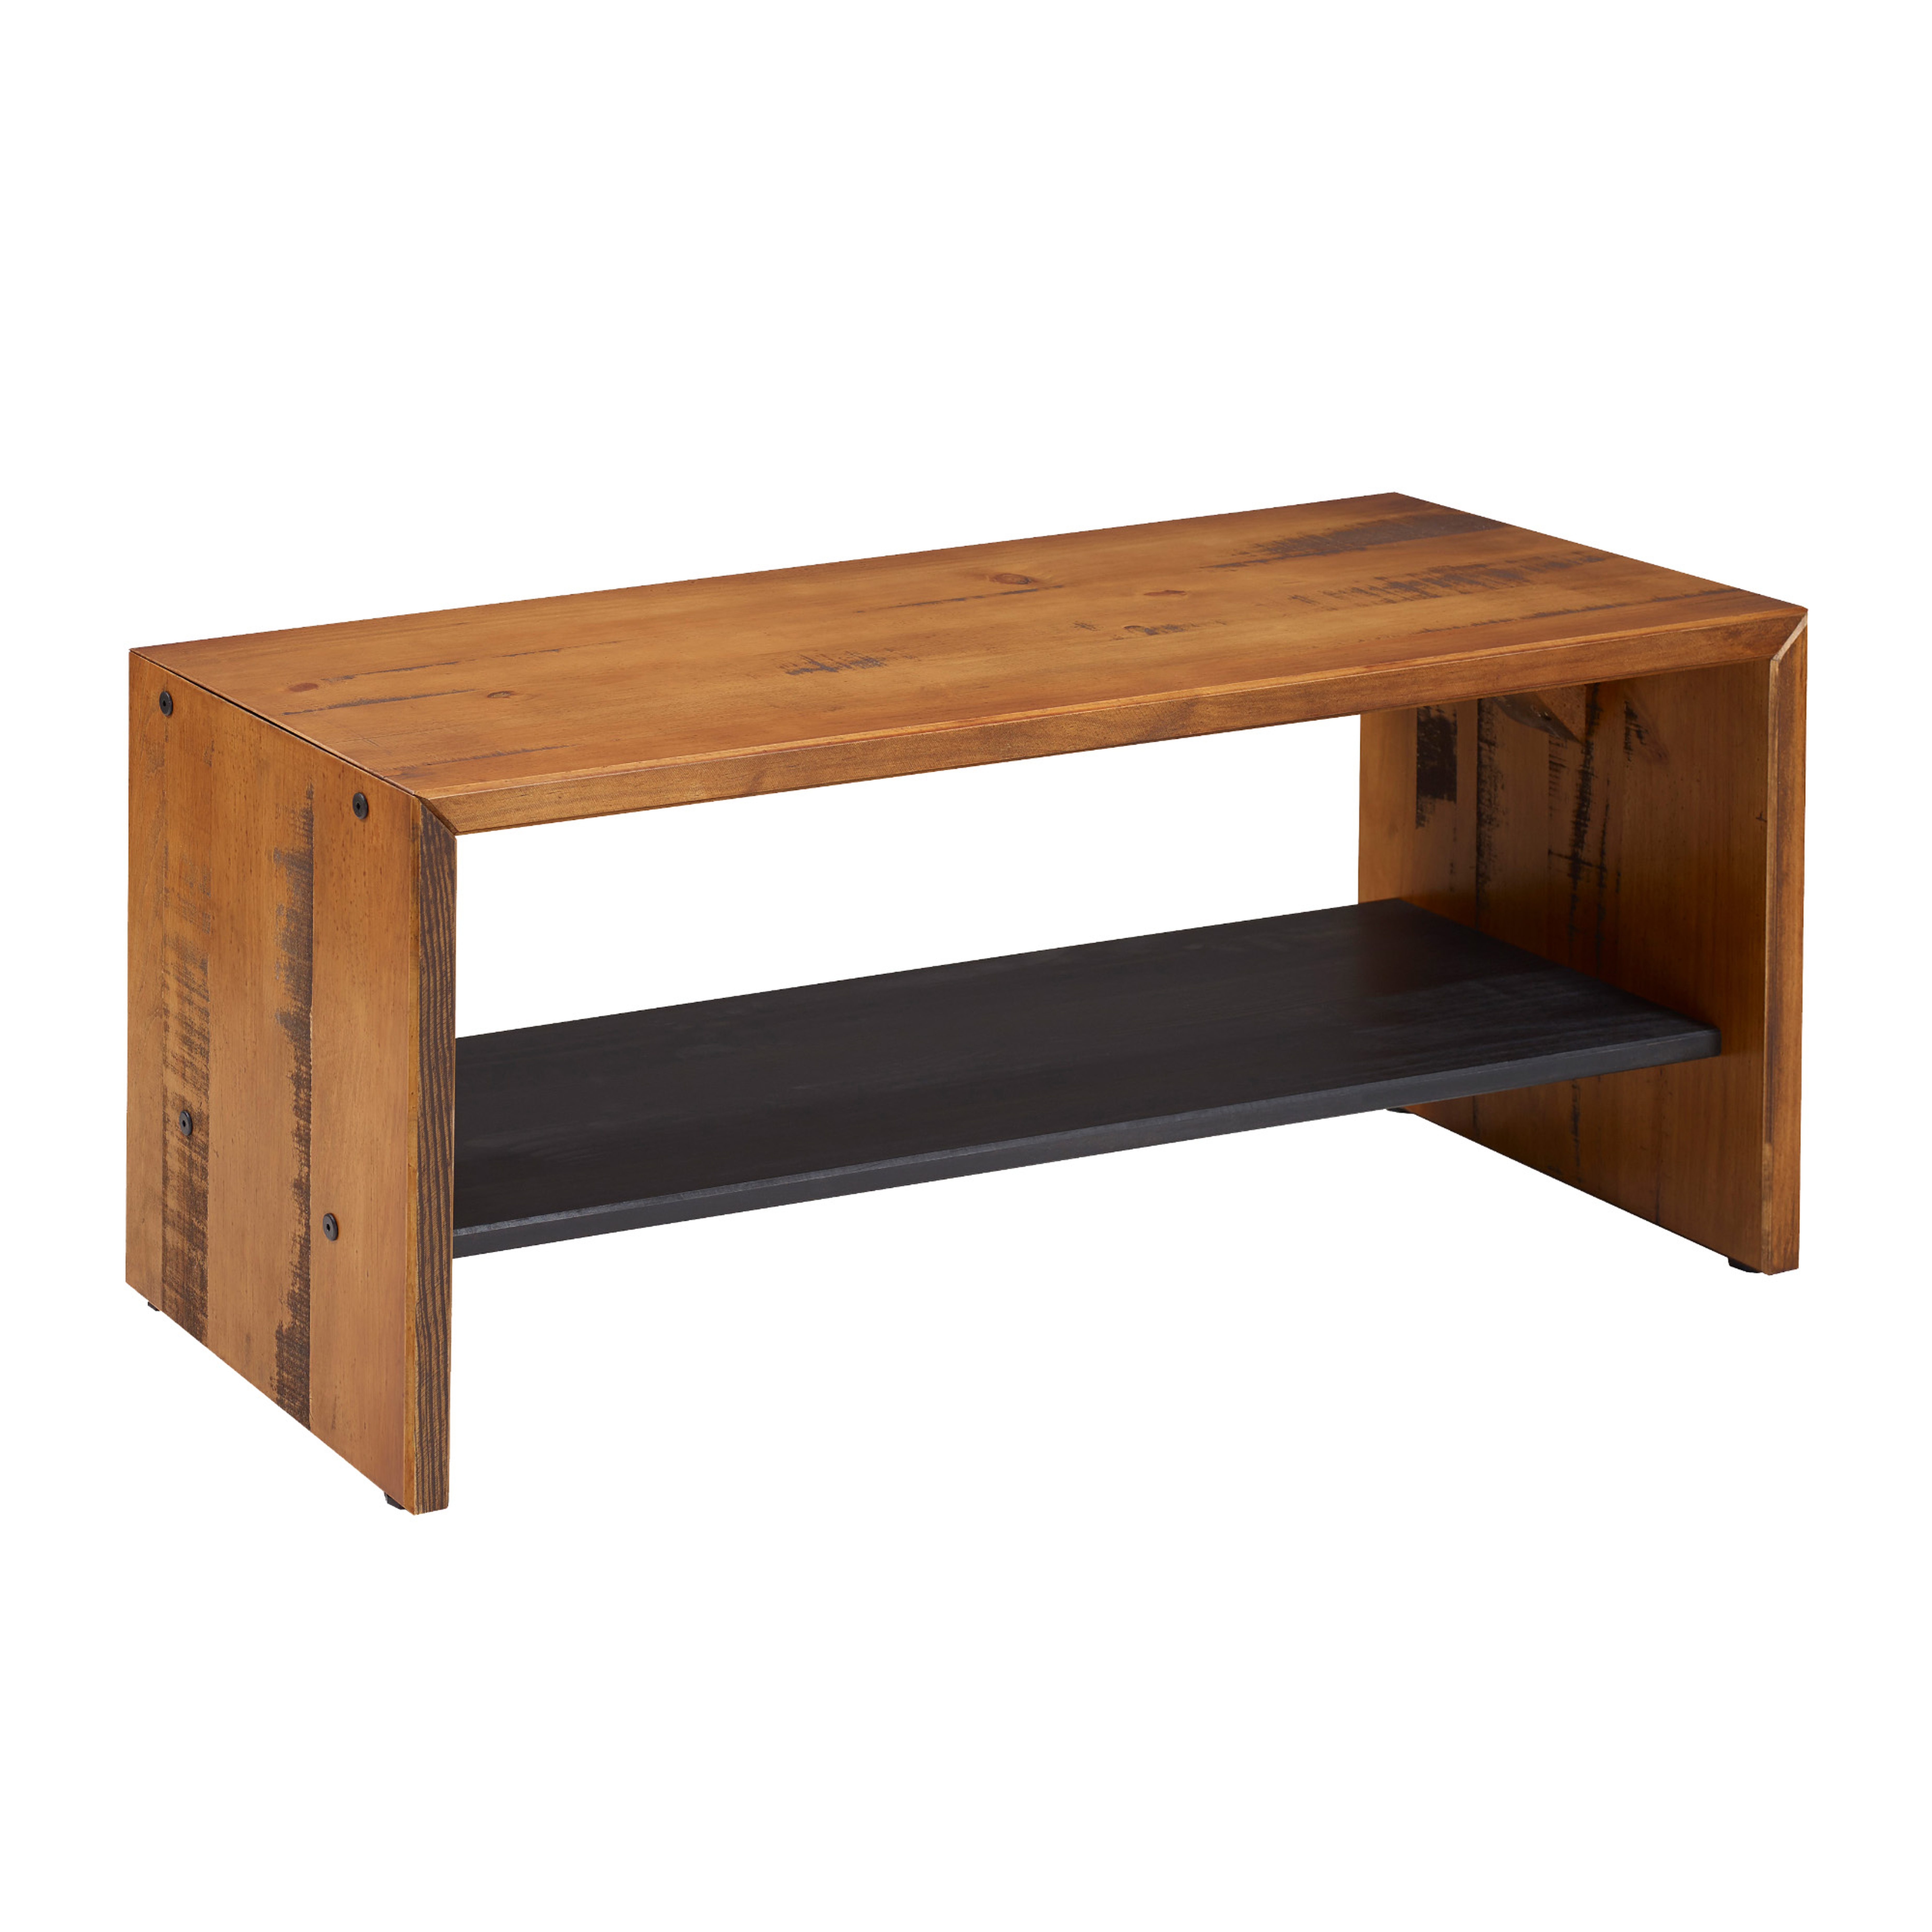 Alpine 42" Rustic Two-Tone Solid Wood Entry Bench - Amber - Contour & Co.